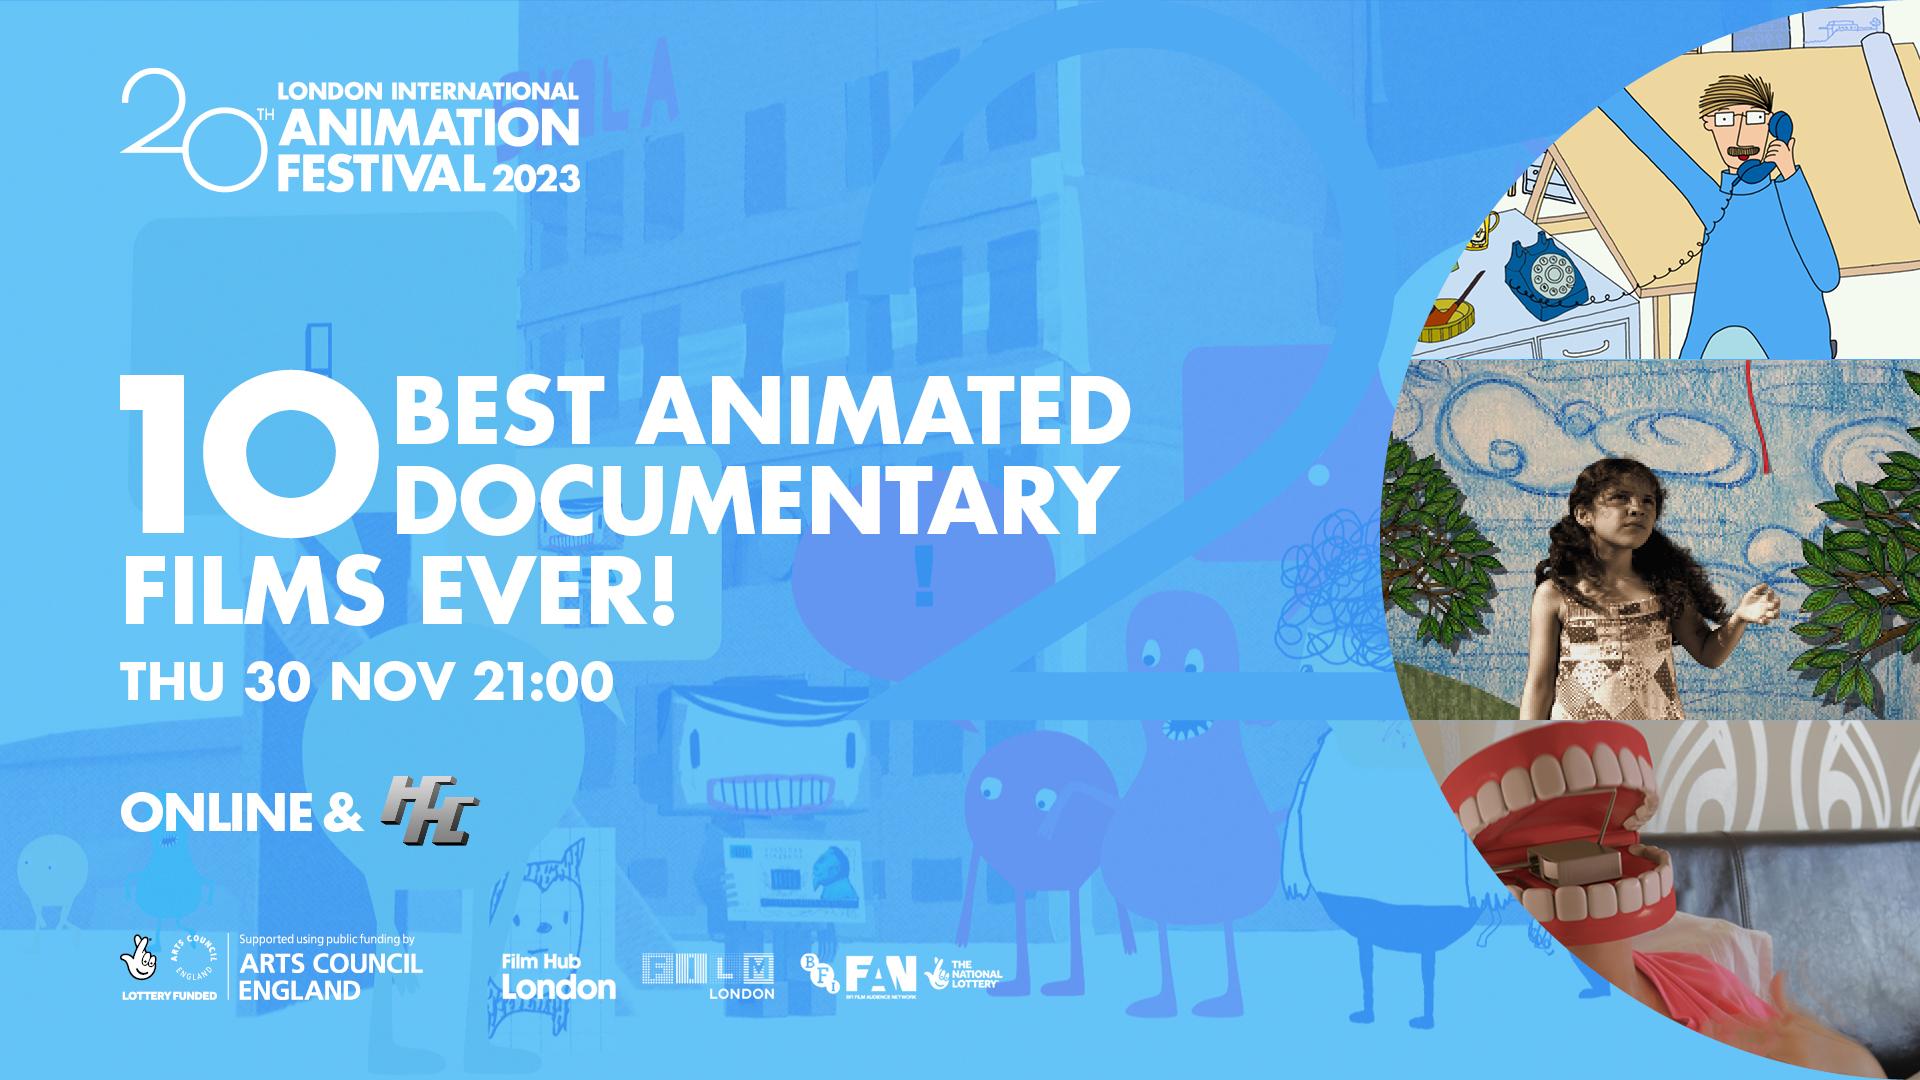 10 Best Animated Documentary Films Ever!